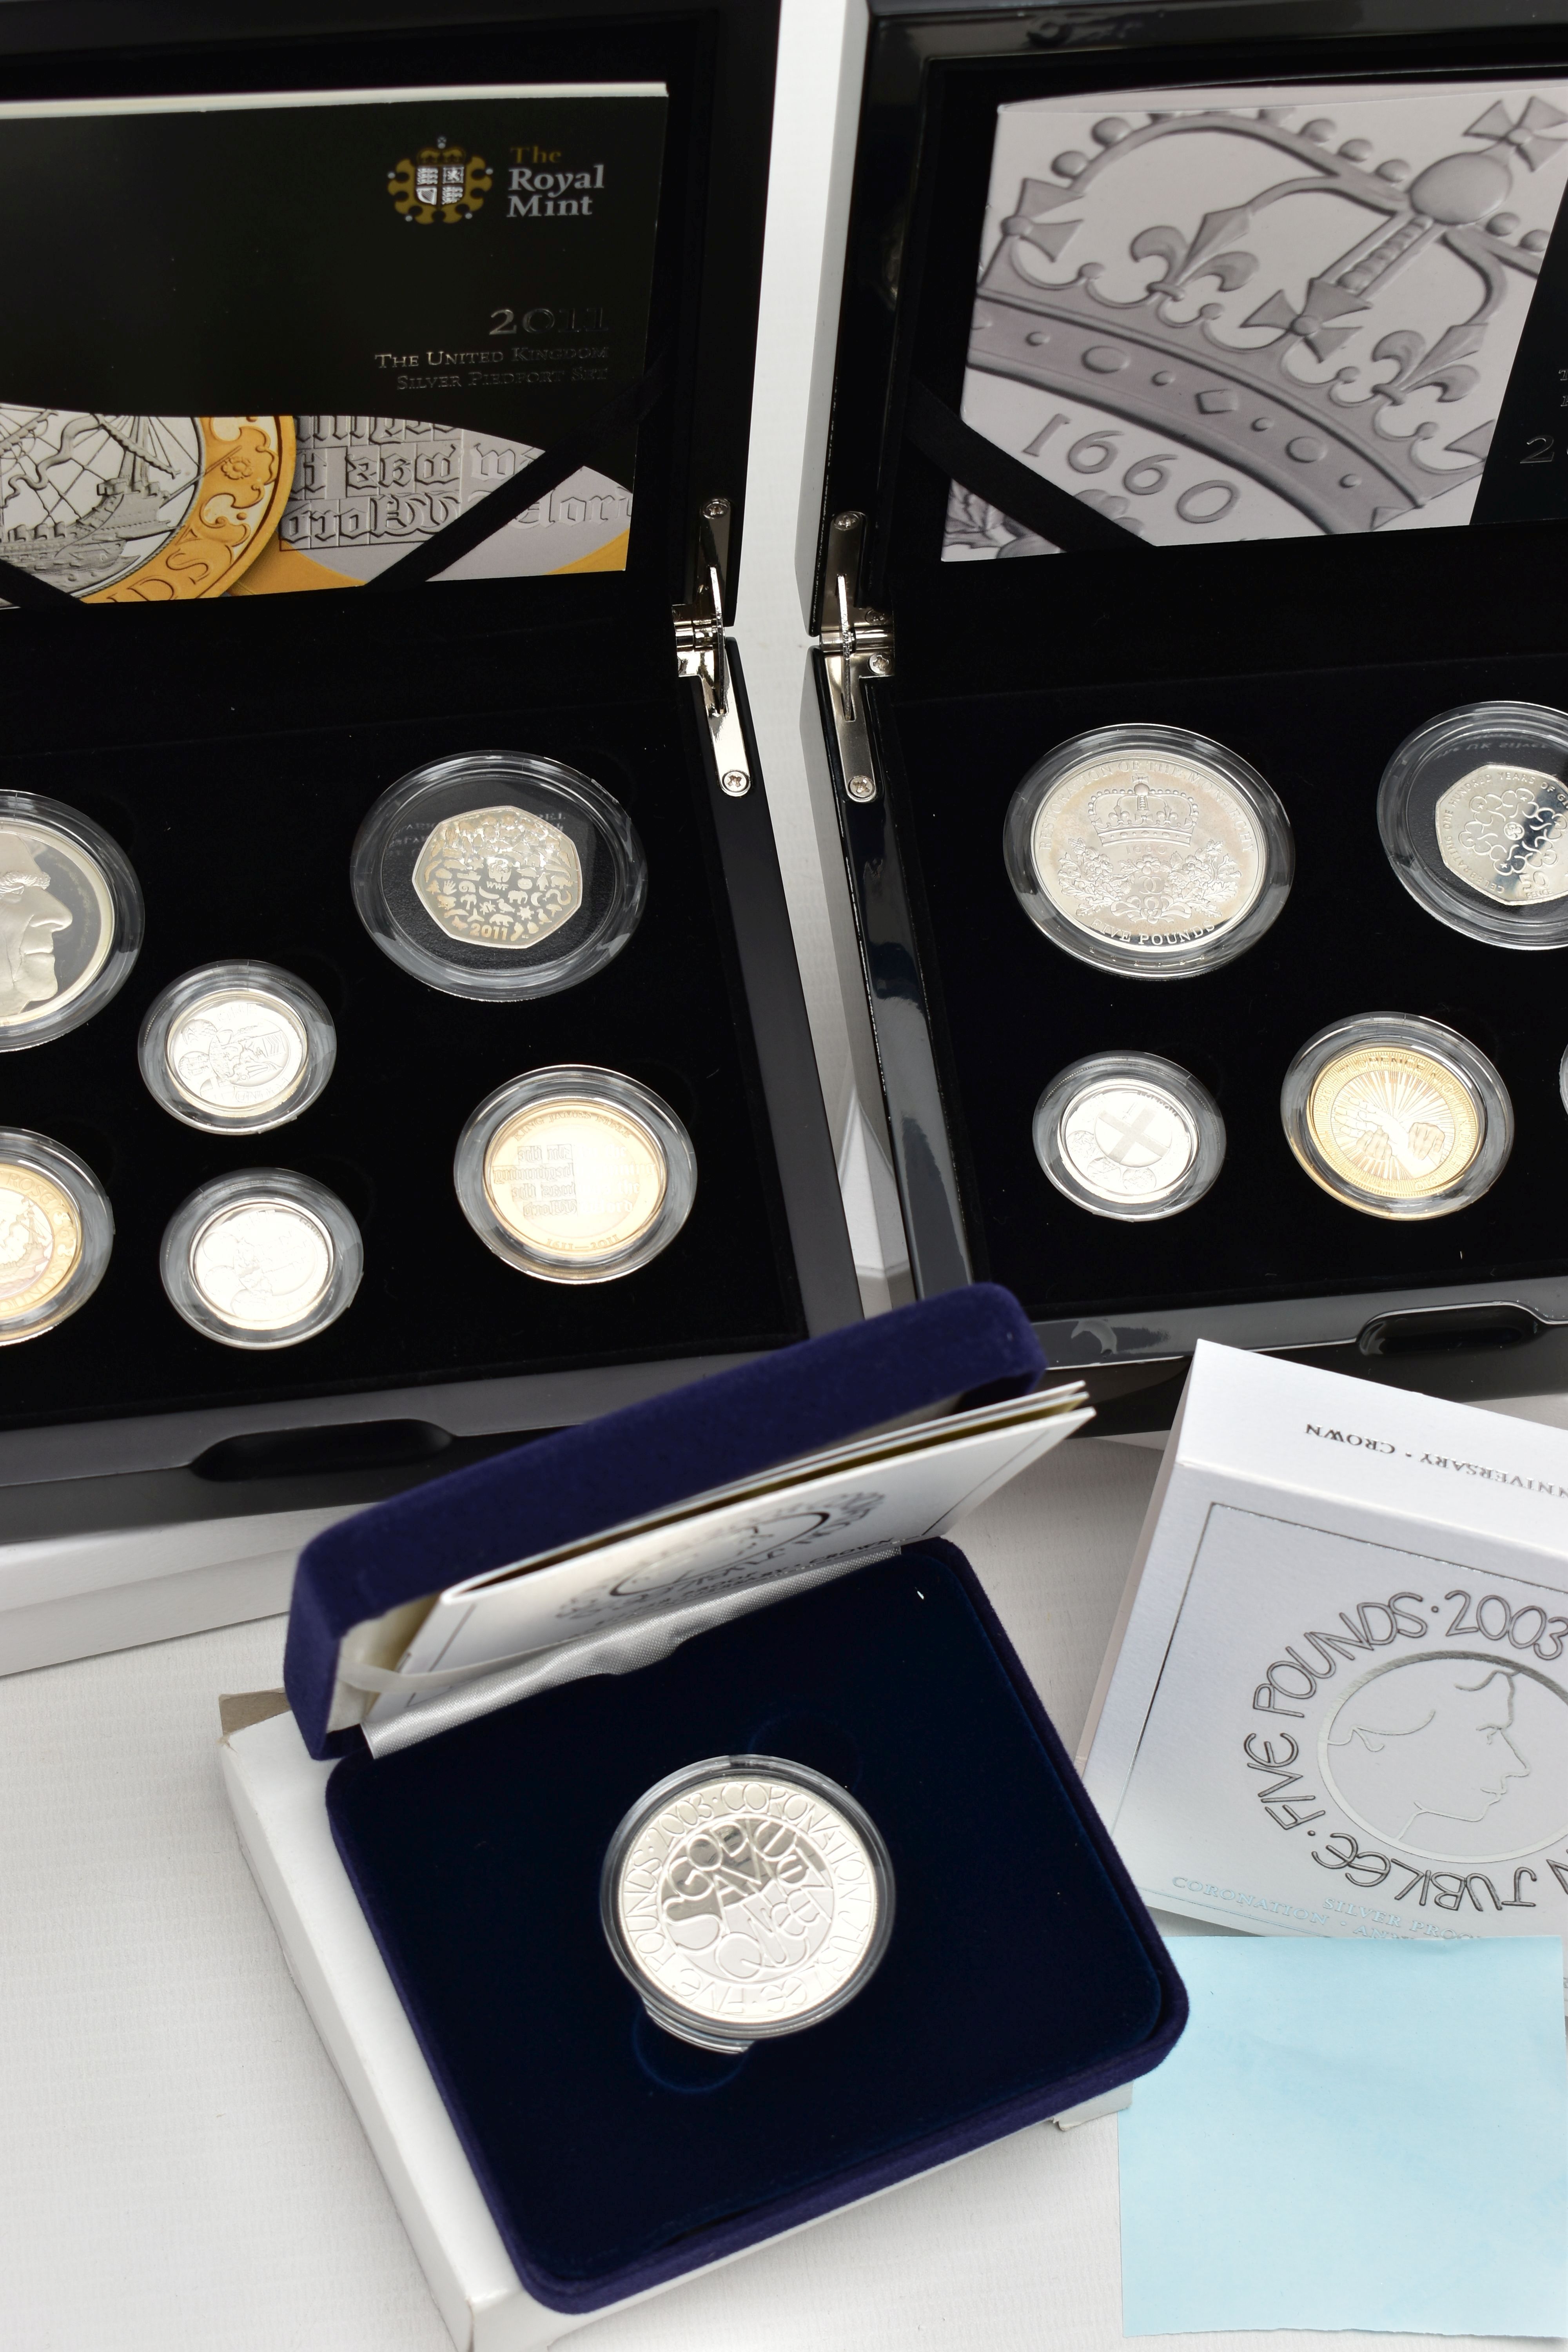 ROYAL MINT ELIZABETH II 2010, 2011, UK SILVER PROOF PIEDFORT COLLECTIONS, 2010 set is a £5 con - Image 2 of 5